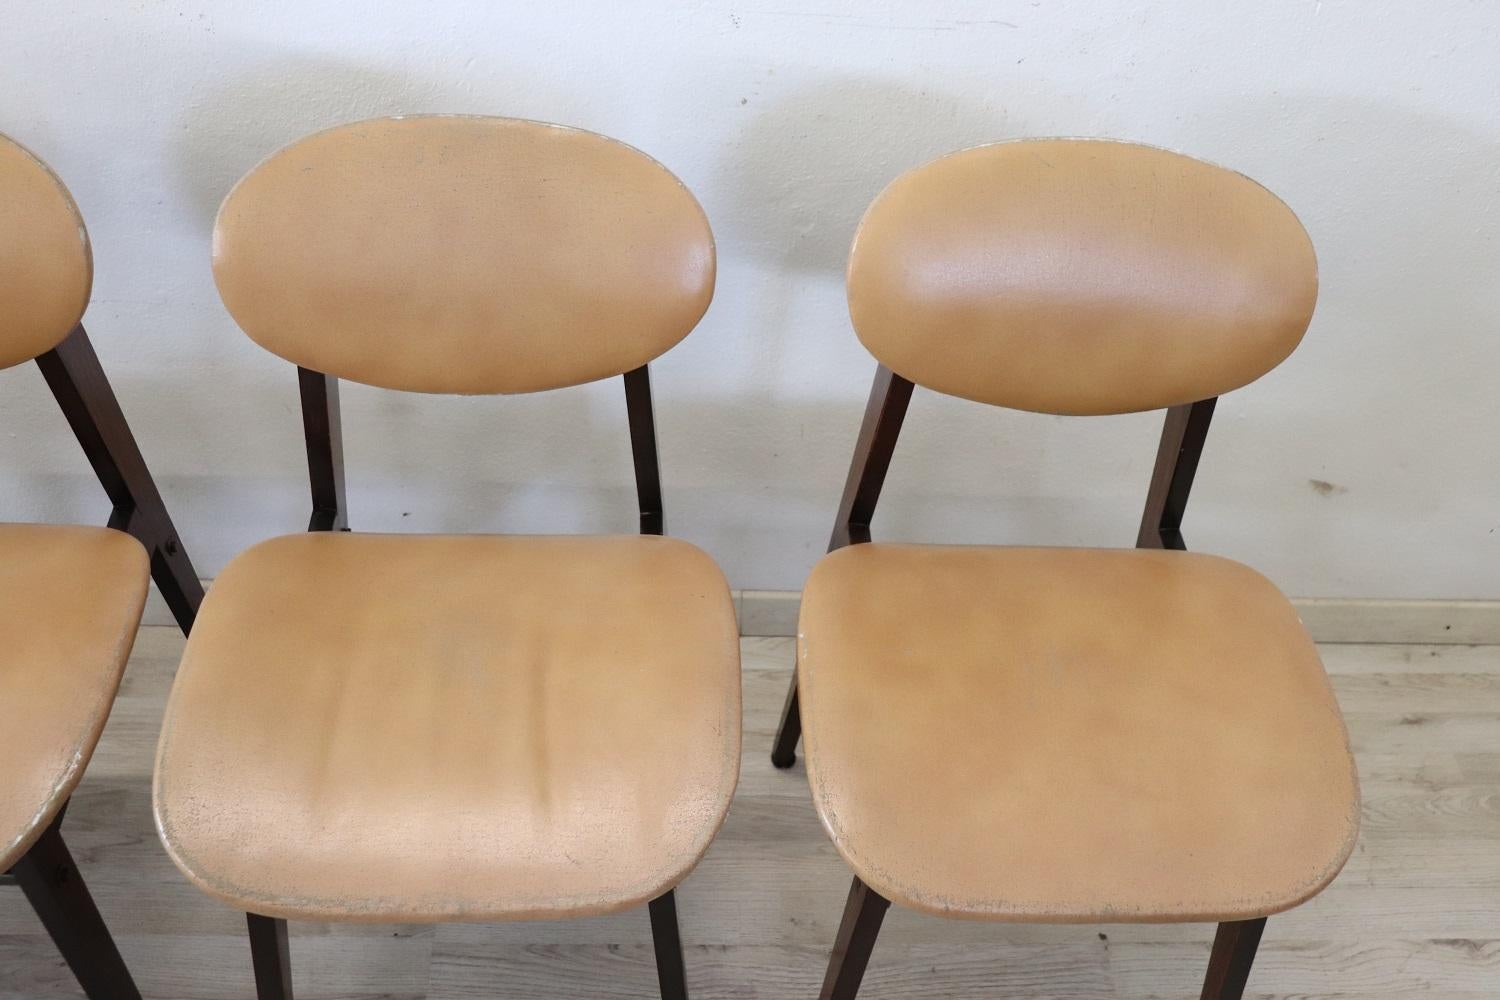 Italian design lovely set of six dining room chairs, 1960s. The chairs are comfortable with a seat in faux leather. The structure is in beech wood. These chairs are perfect for the modern home. Used conditions with widespread signs of wear in the